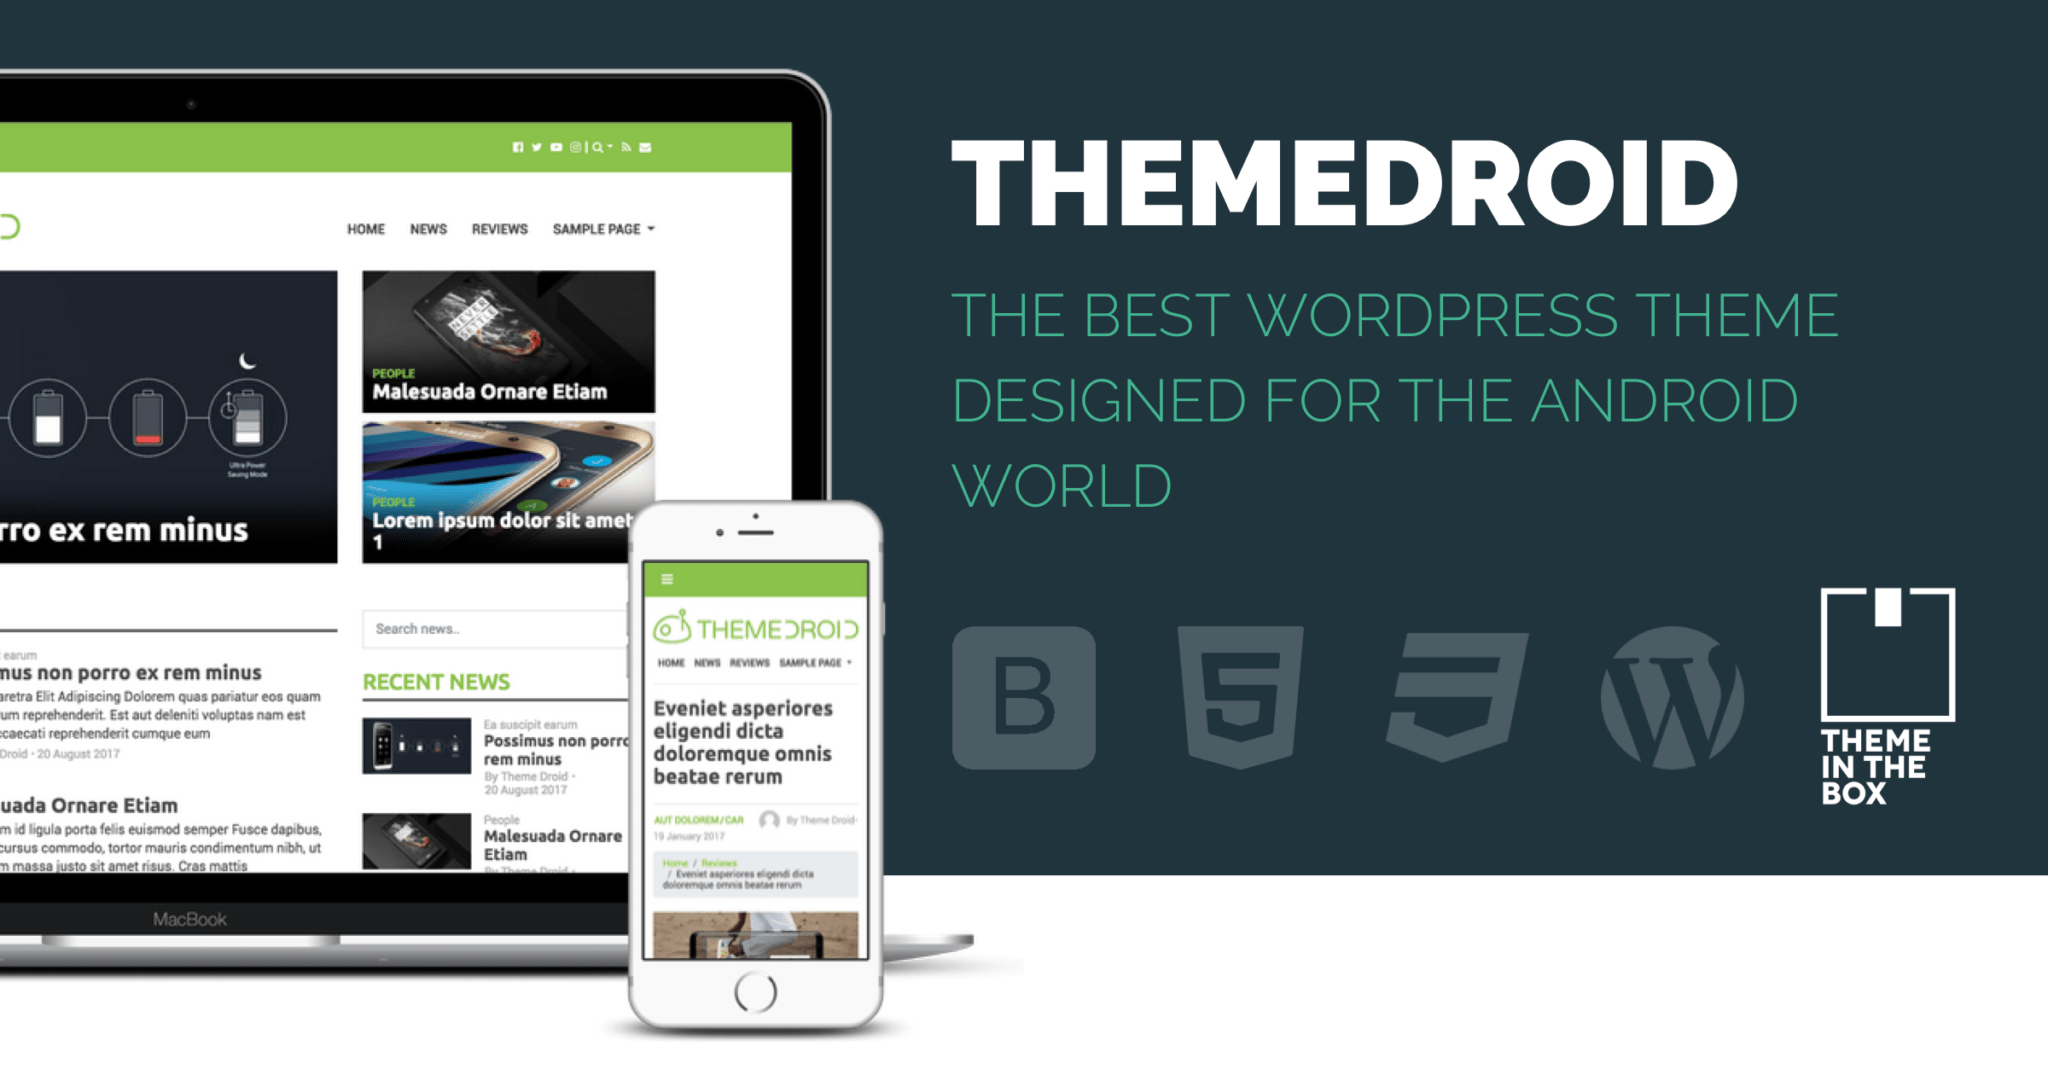 ThemeDroid - WordPress Theme Designed for the Android World ...